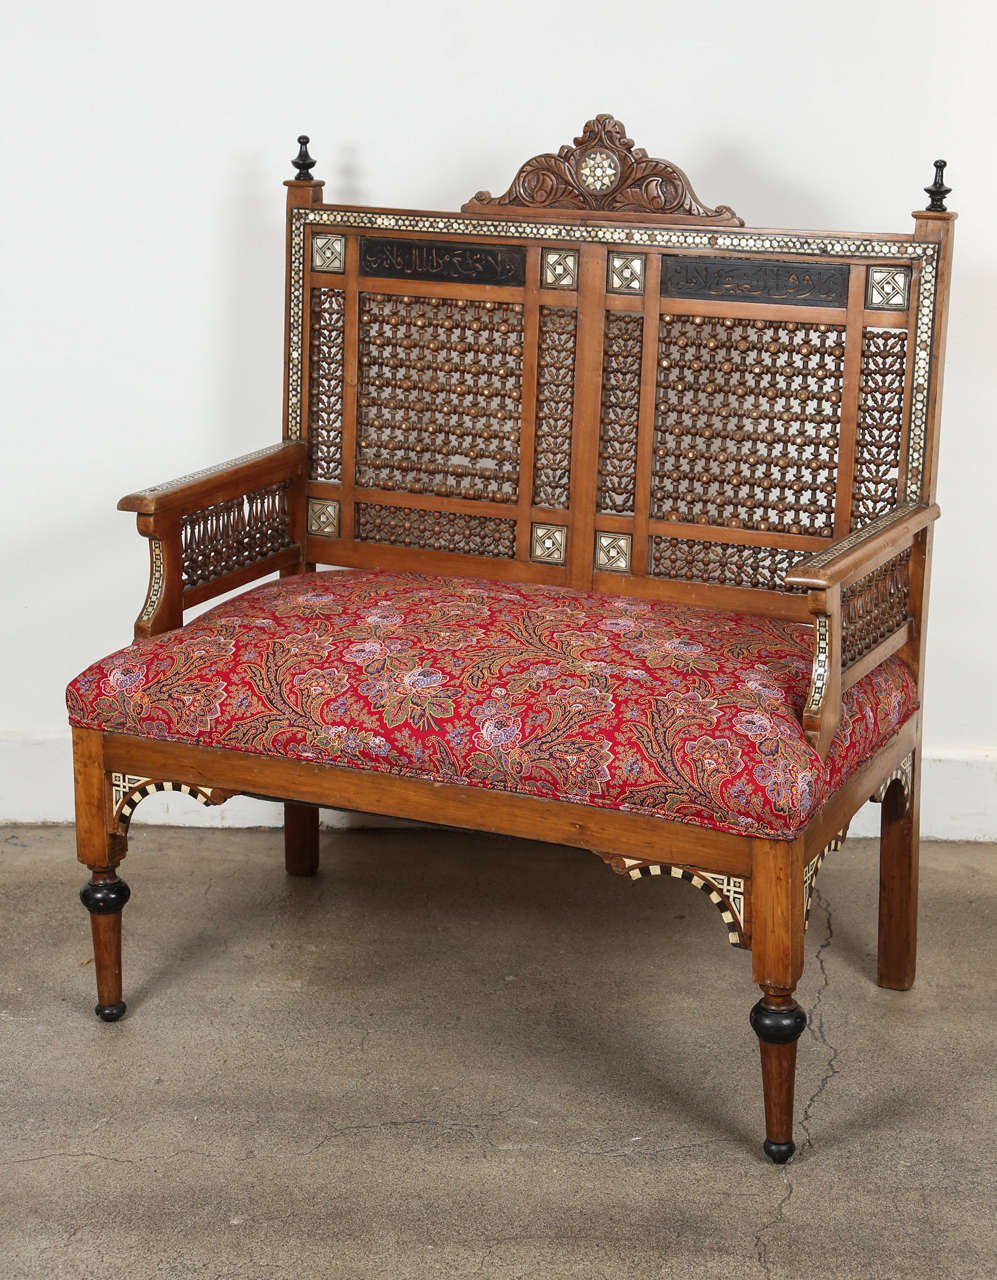 Moorish Syrian Settee suite with sofa and 2 chairs.
Inlaid with mother of pearl and ebony, fine fret work, mousharabie work and engraved with Arabic designs.
Sofa size is: 37